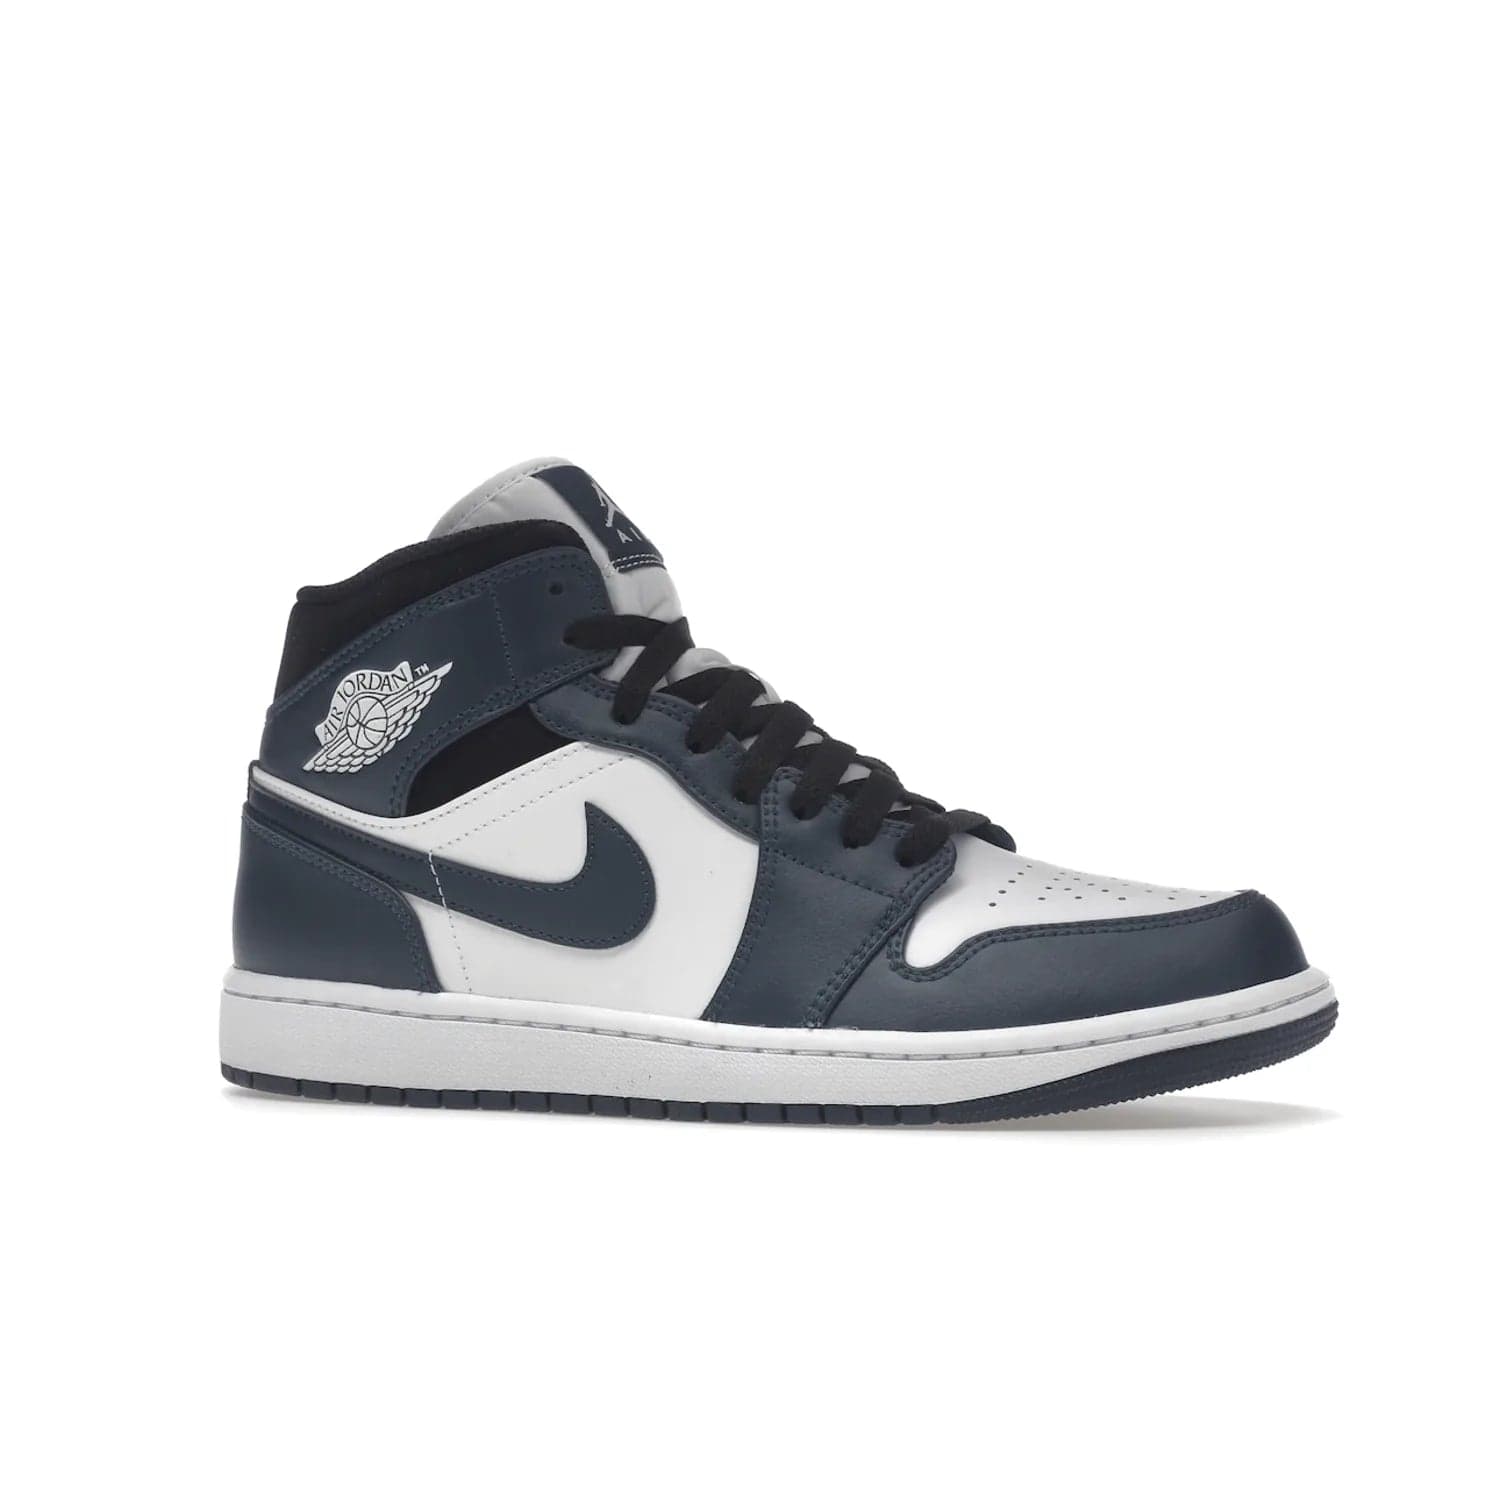 Jordan 1 Mid Armory Navy - Image 3 - Only at www.BallersClubKickz.com - The Jordan 1 Mid Armory Navy: classic basketball sneaker with soft white leather upper, deep navy blue overlays, and black leather ankle detailing. Iconic style with Jordan Wings logo and Jumpman label.